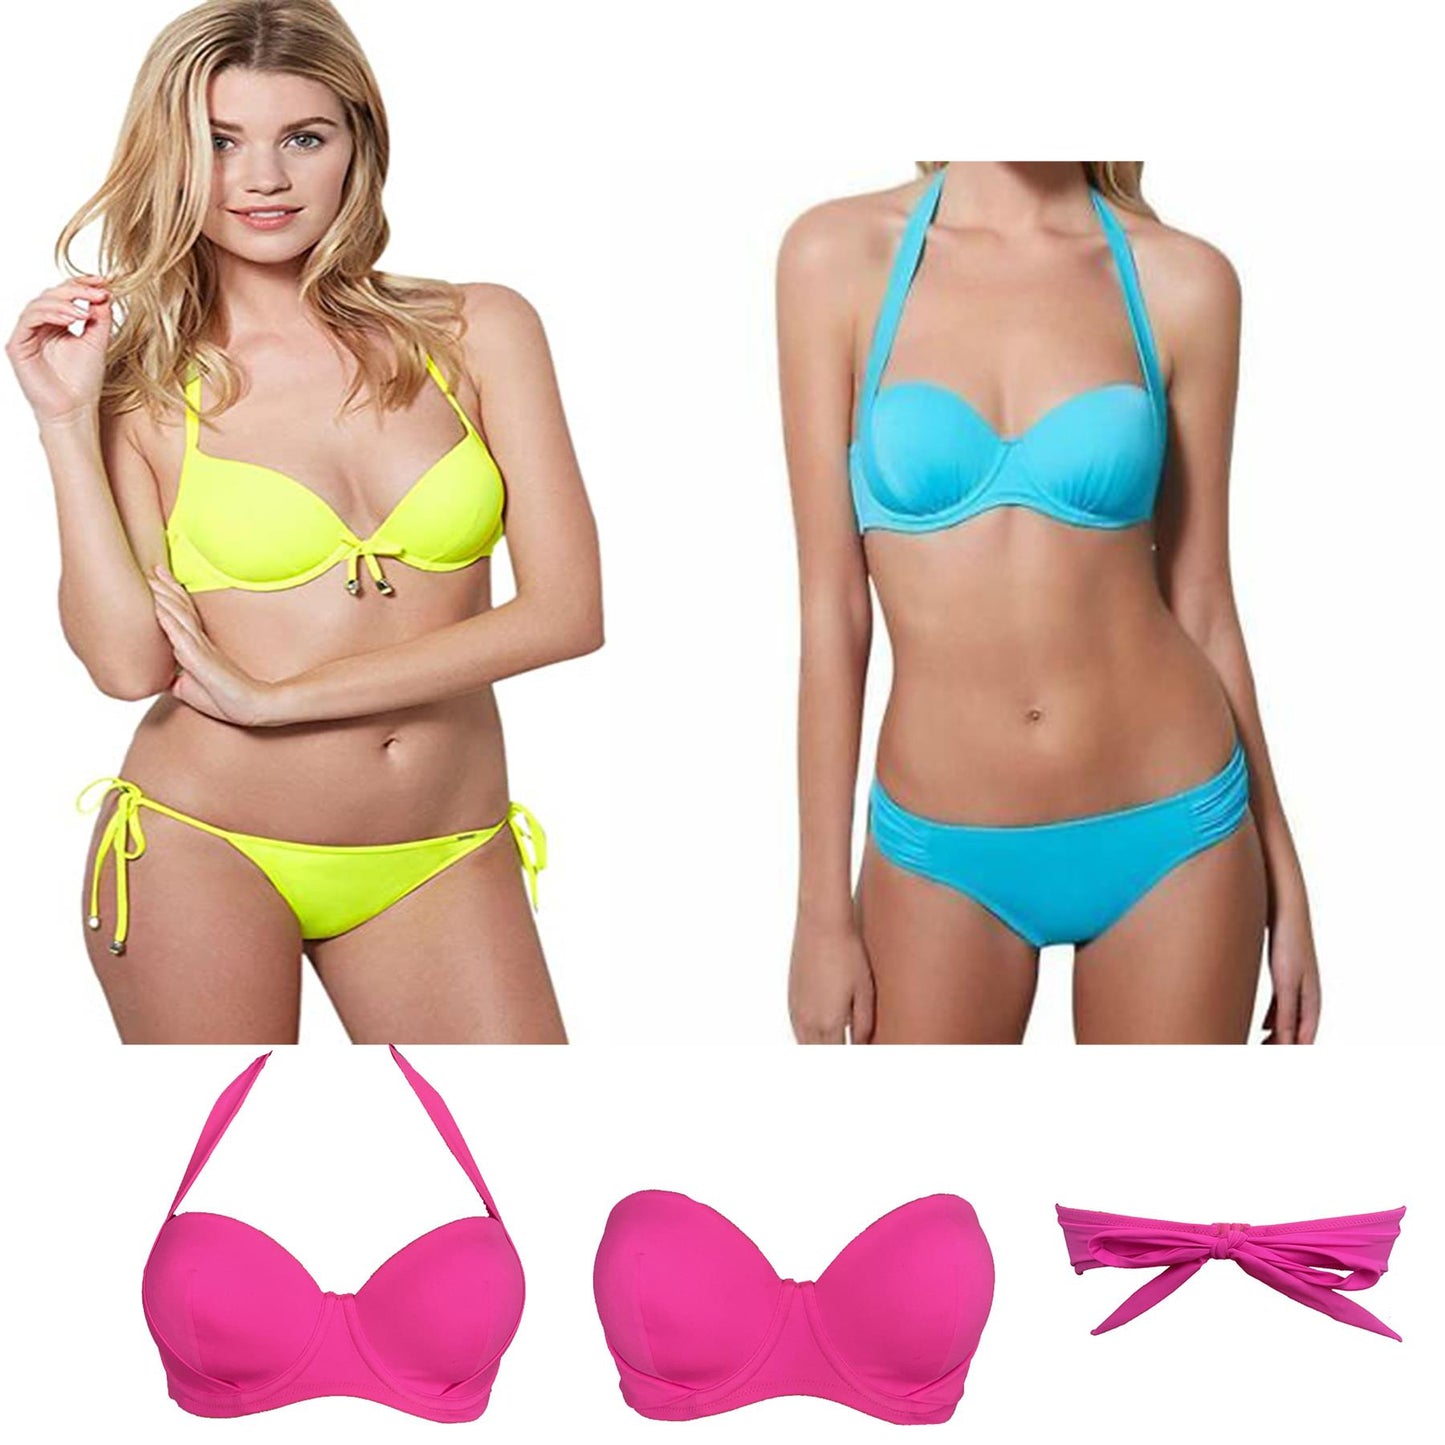 Boux Avenue Bikini Top and/or Briefs (Sold Seperately)